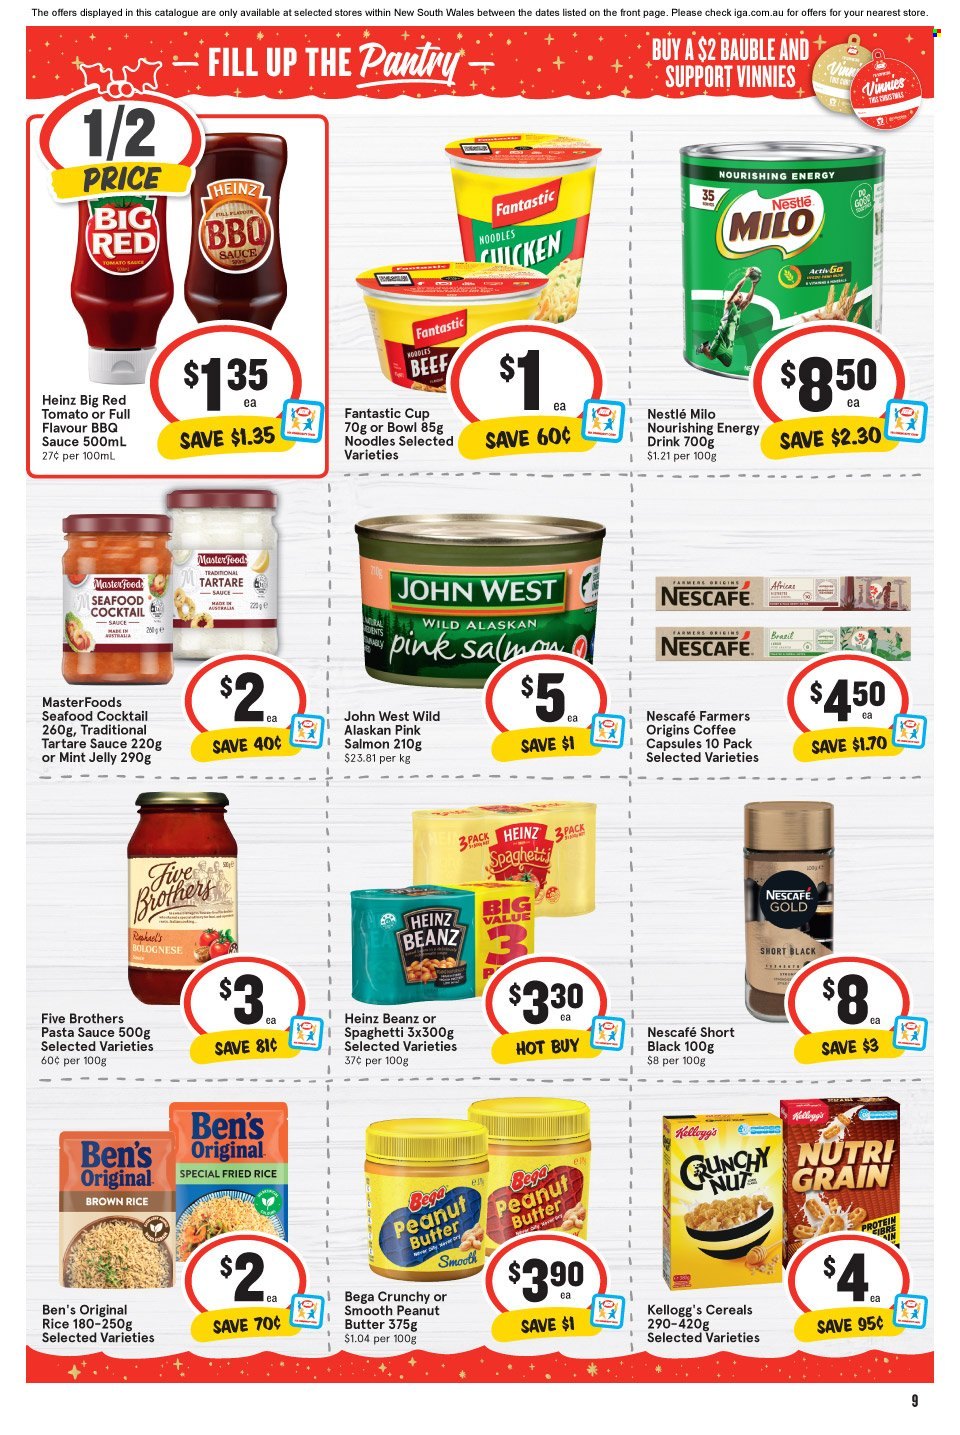 thumbnail - IGA Catalogue - 1 Dec 2021 - 7 Dec 2021 - Sales products - salmon, seafood, spaghetti, pasta sauce, sauce, noodles, Milo, Nestlé, jelly, Kellogg's, Heinz, cereals, brown rice, BBQ sauce, mint jelly, energy drink, coffee, Nescafé, coffee capsules, BROTHERS, cup, bowl, bauble. Page 11.